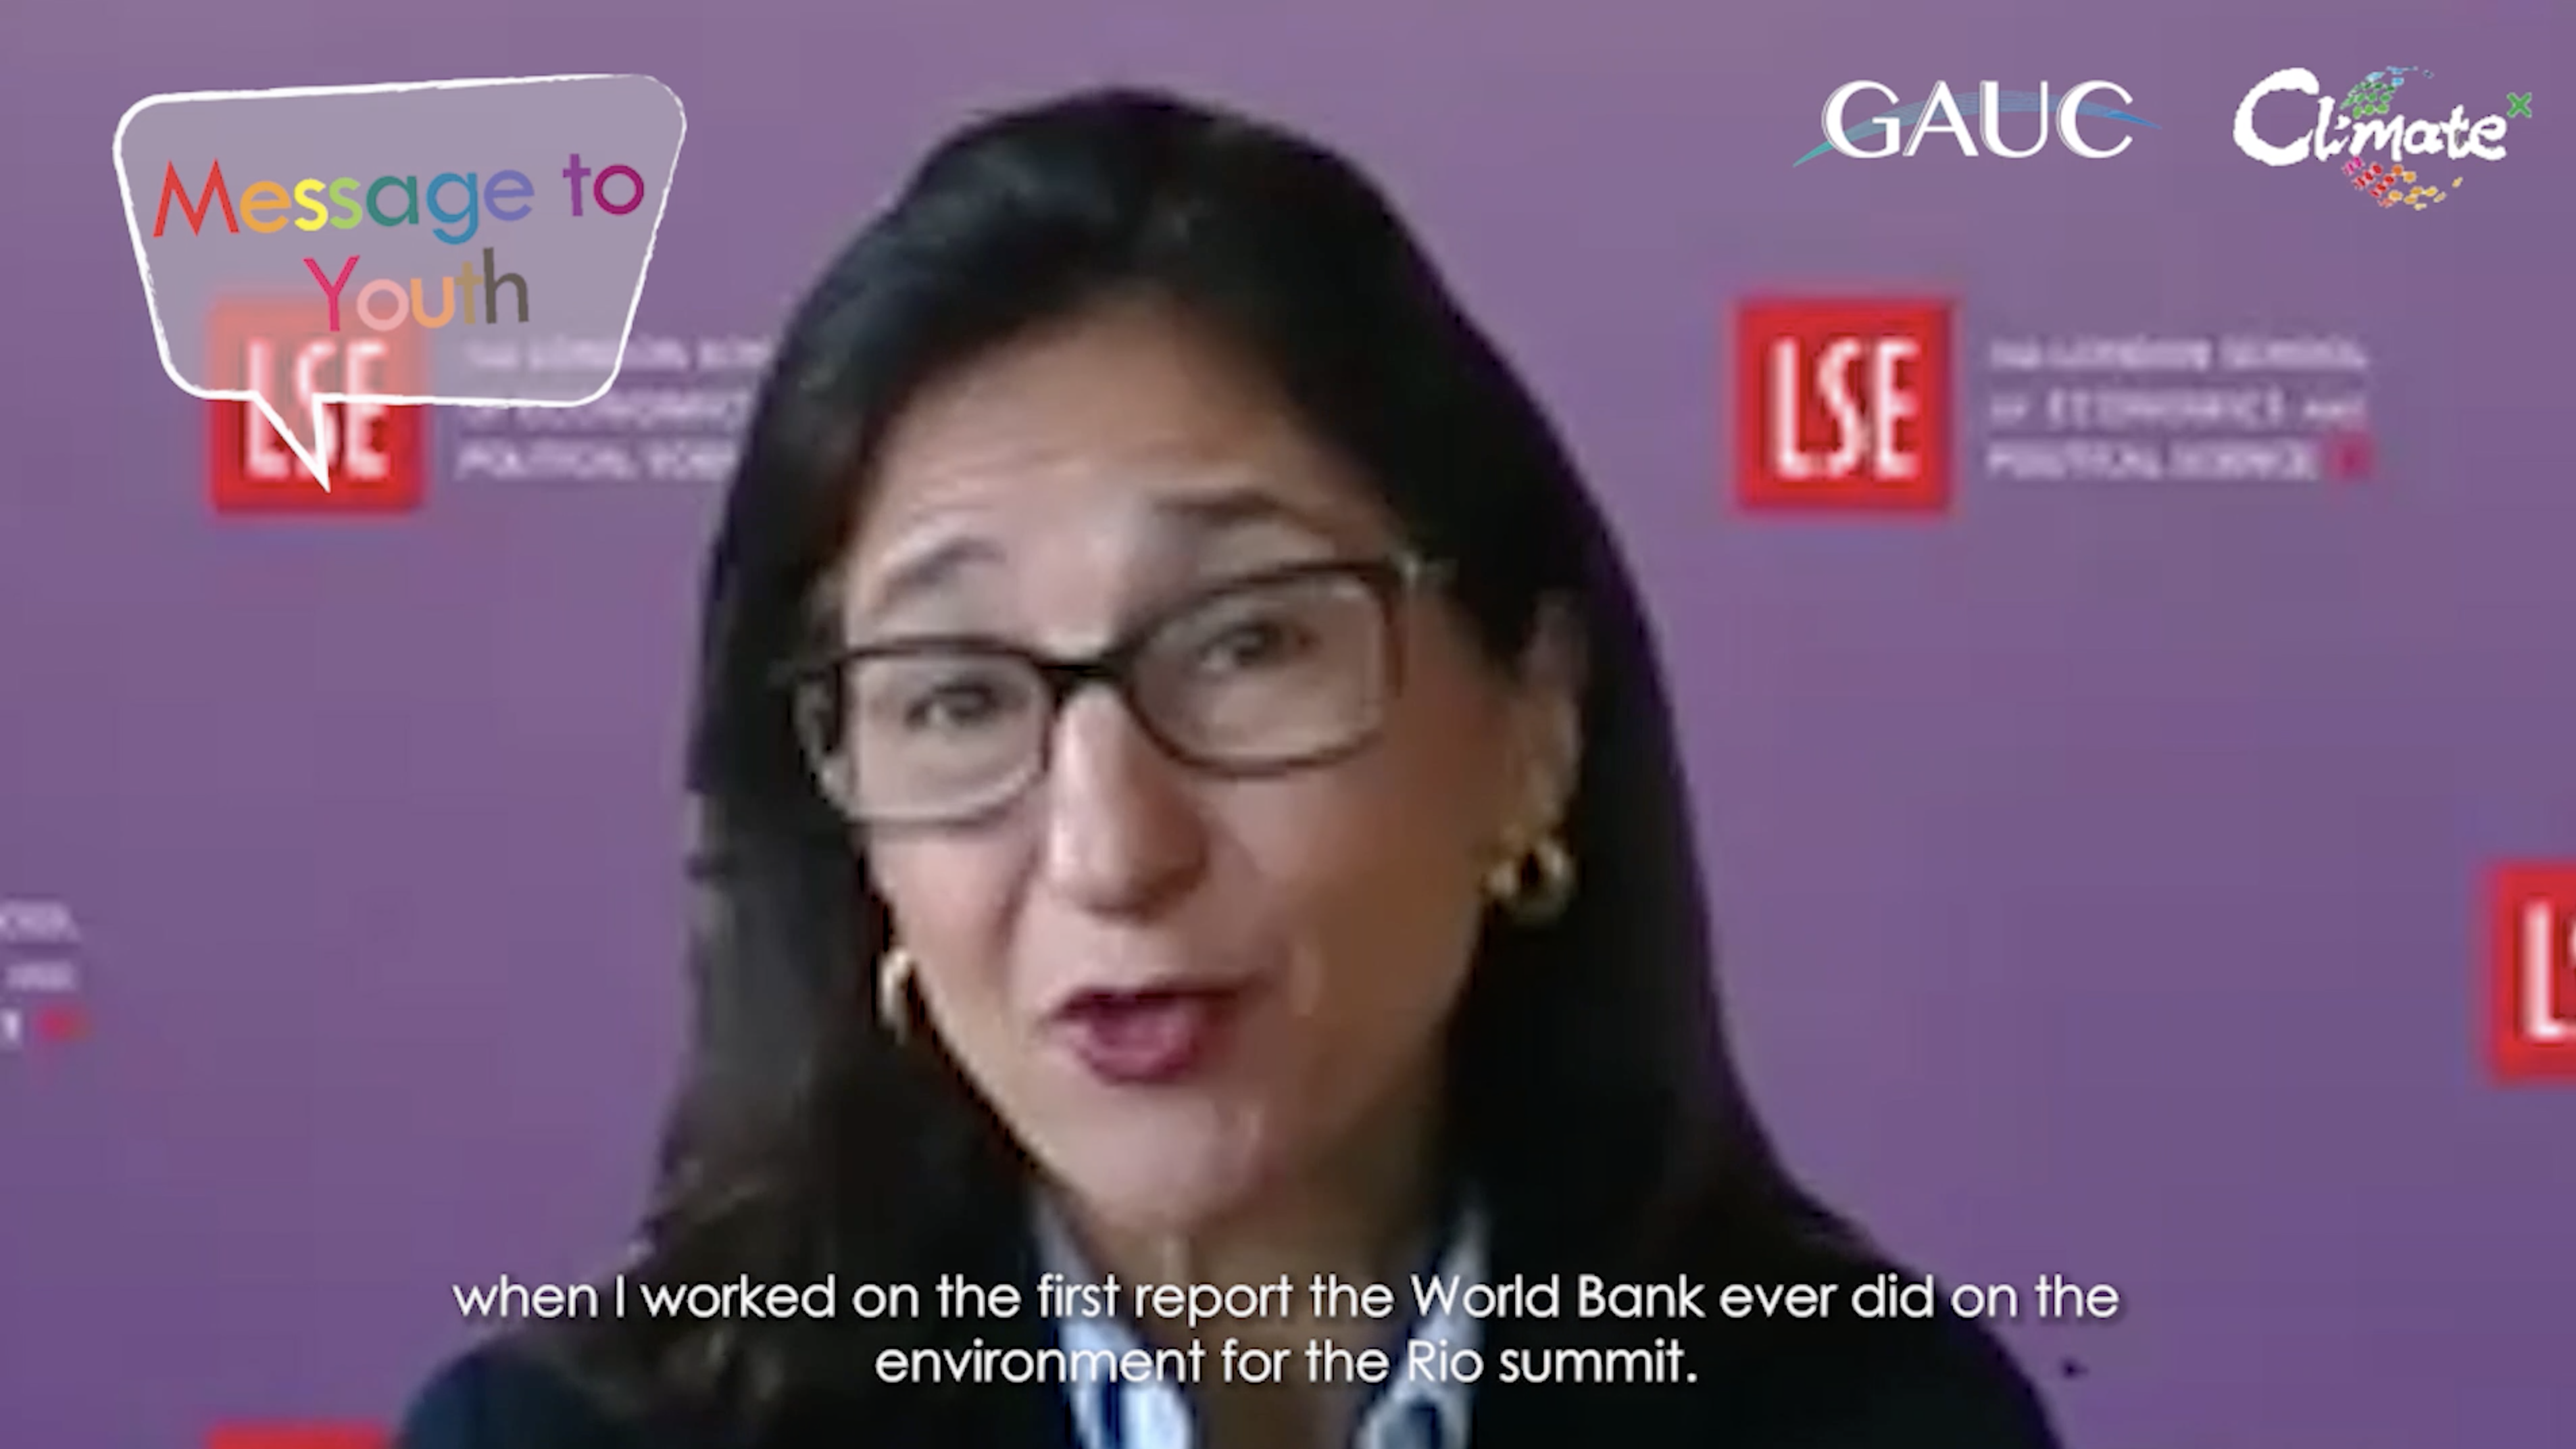 LSE Director's Message to Youth